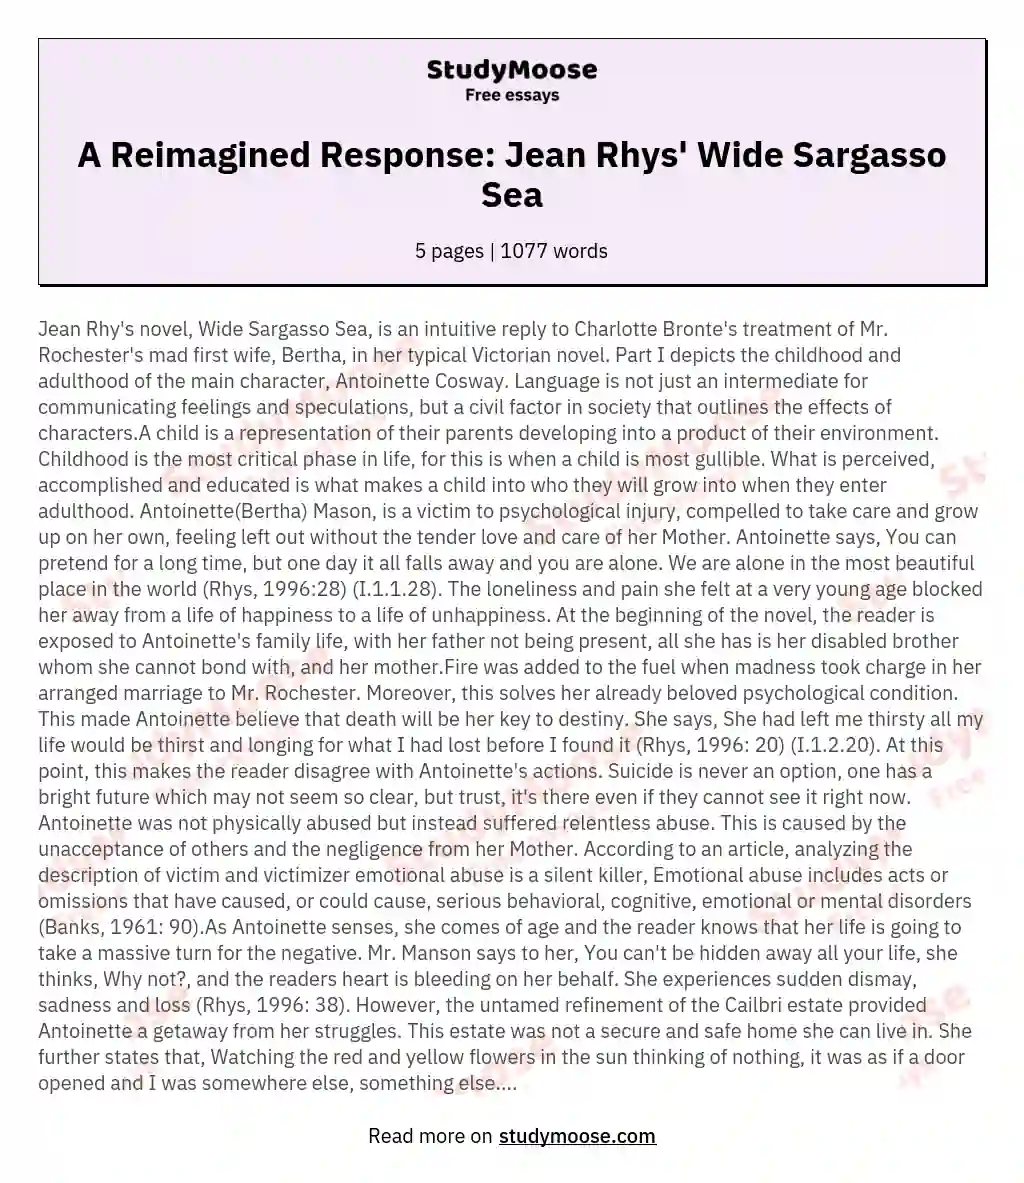 A Reimagined Response: Jean Rhys' Wide Sargasso Sea essay